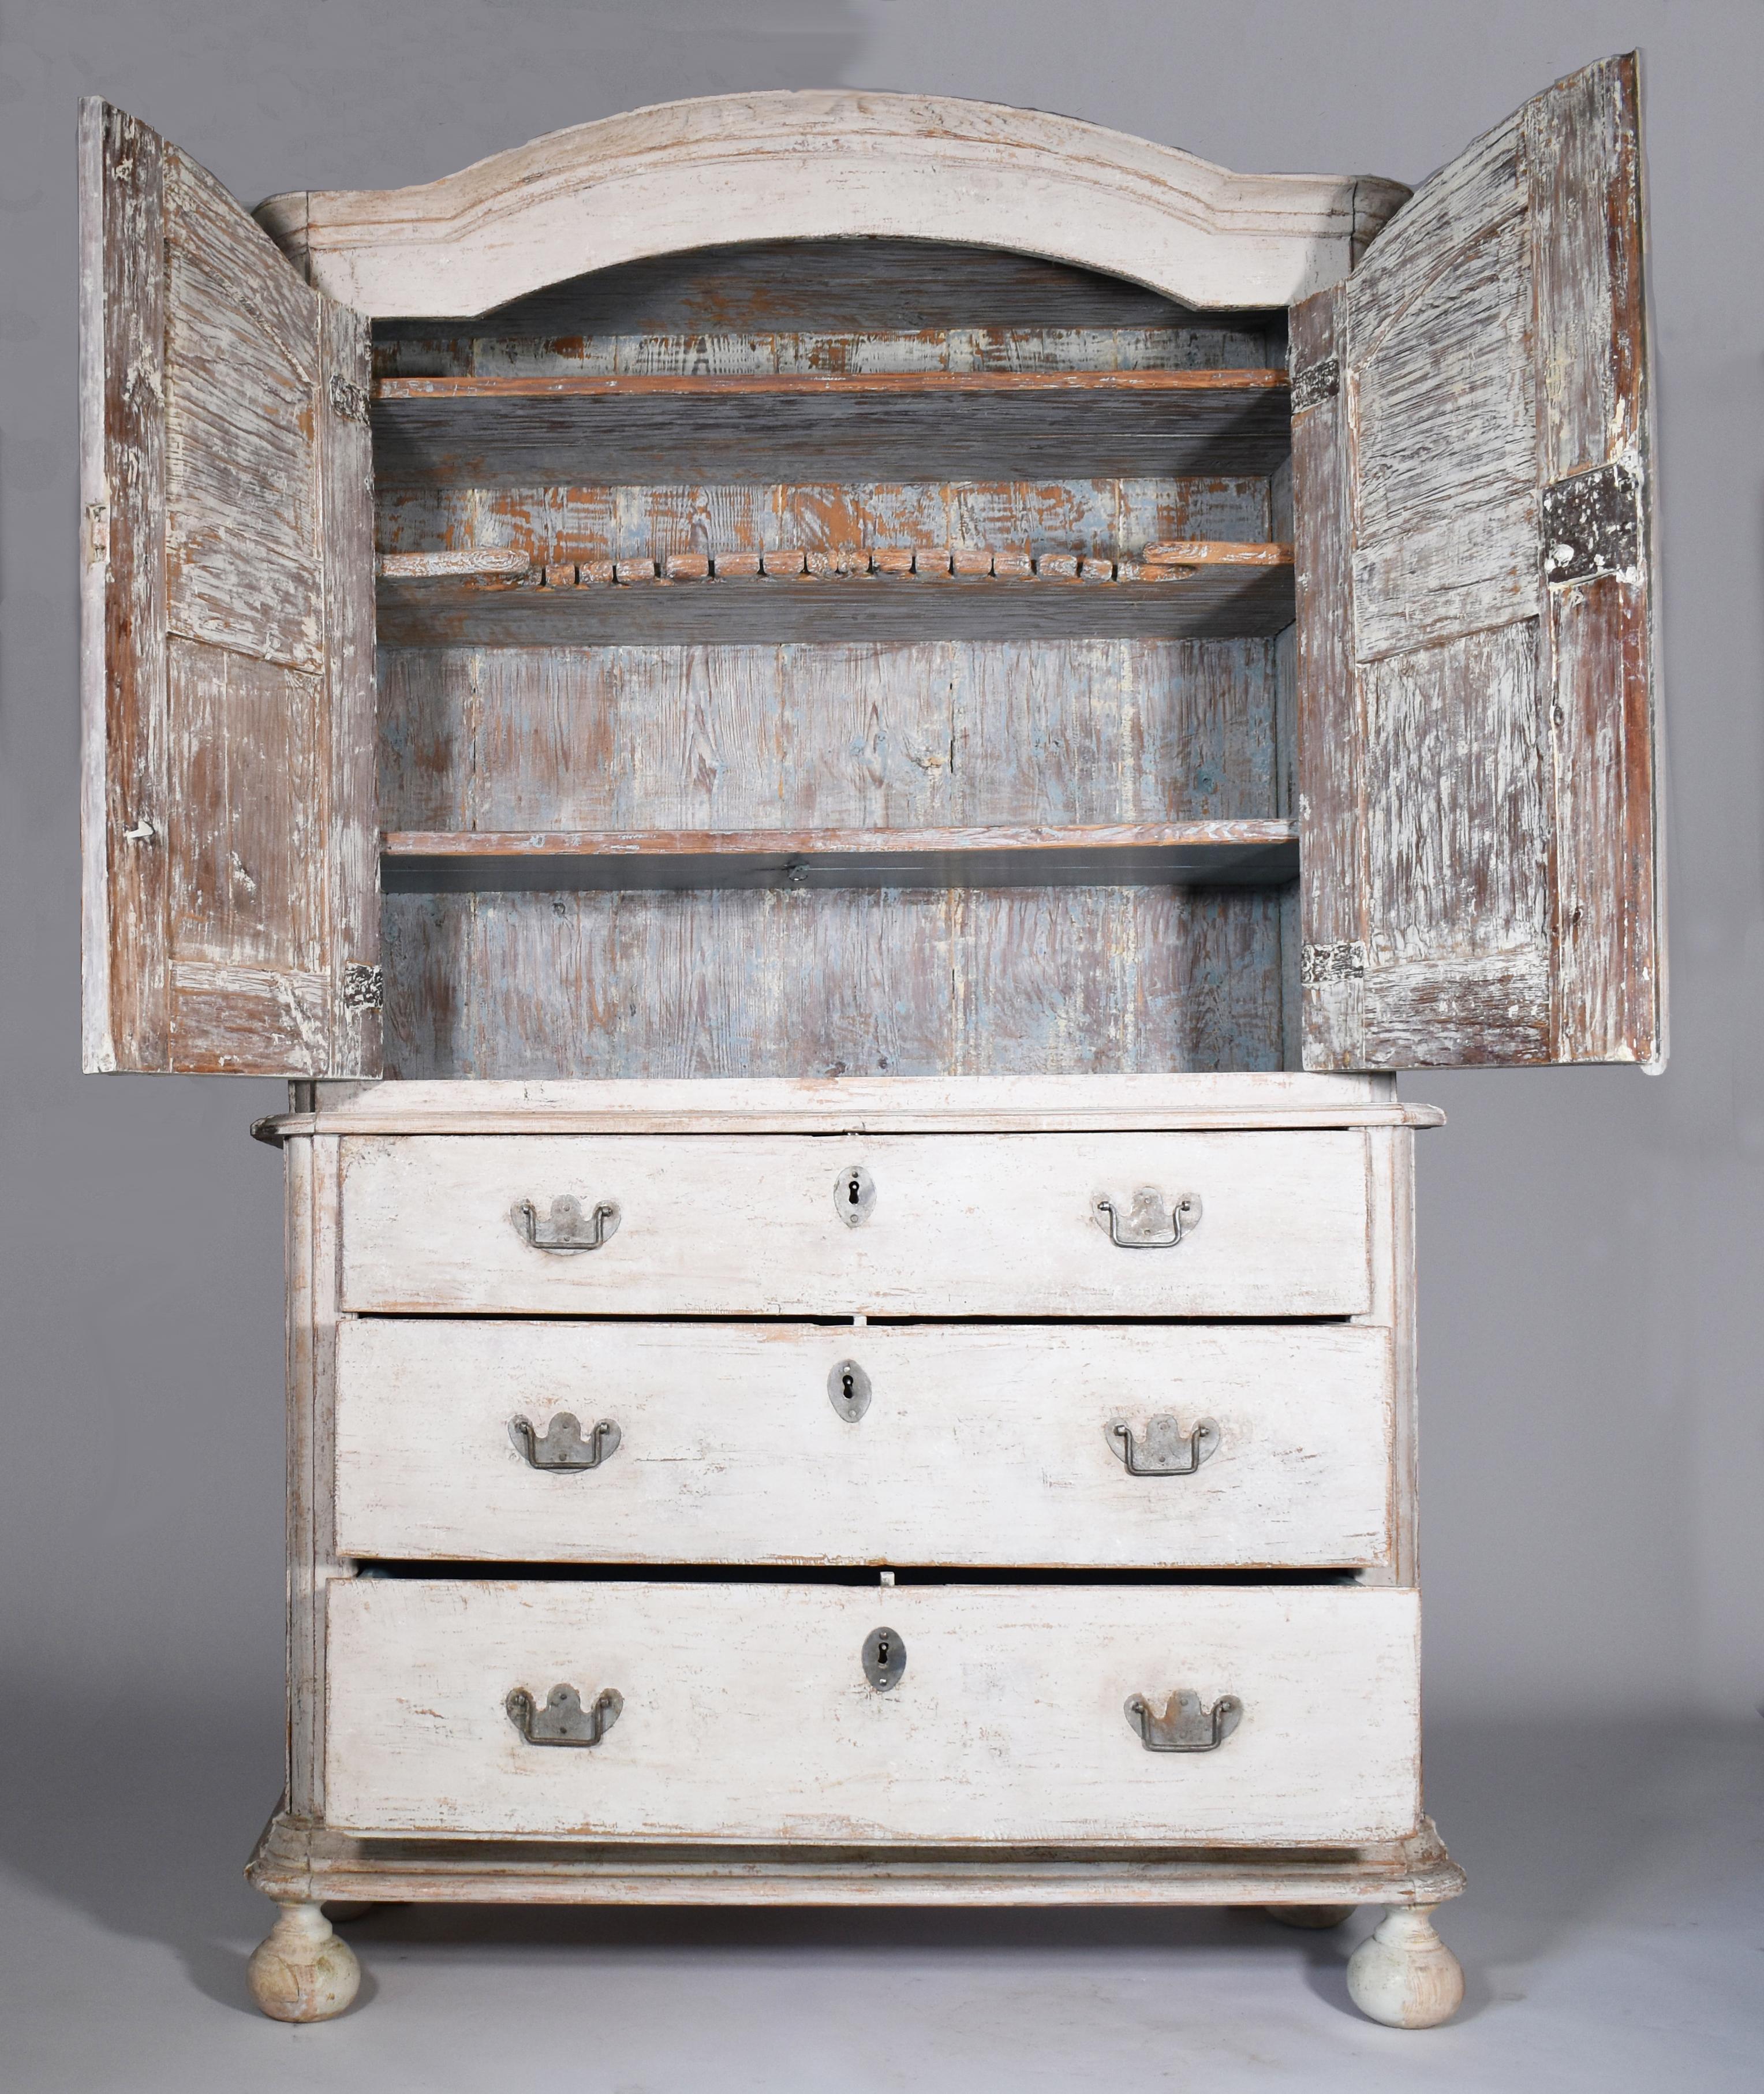 Beautifully proportioned Swedish cupboard or buffet with a white-gray exterior. Hand-carved reeding and diamond detail, original forged handles, escutcheon, and key. Interior scraped to show a lovely blue-grey finish.